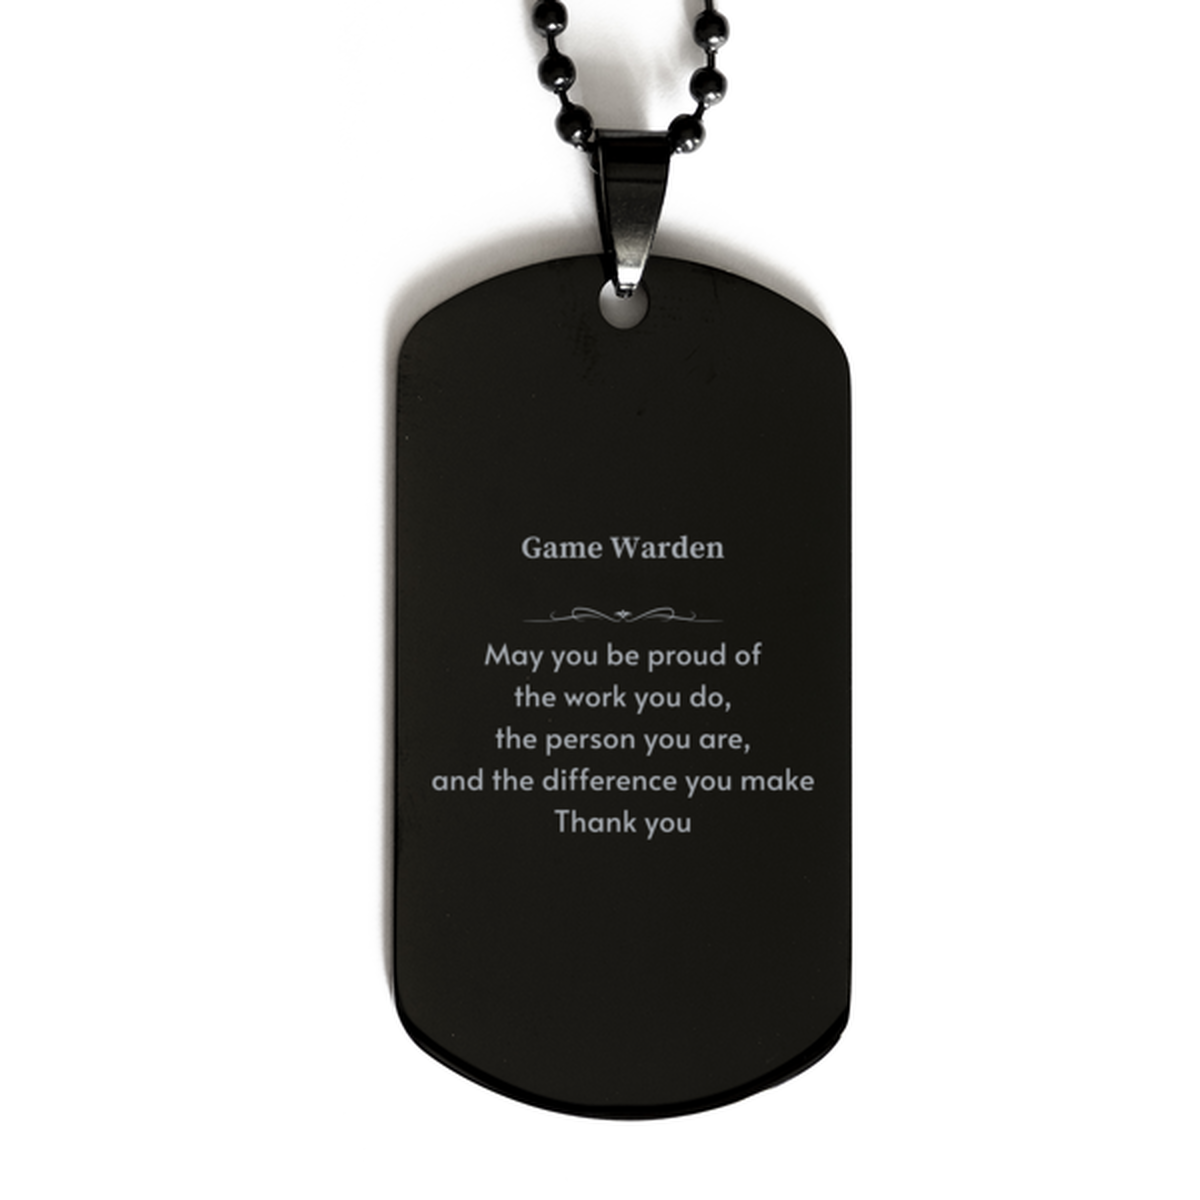 Heartwarming Black Dog Tag Retirement Coworkers Gifts for Game Warden, Game Warden May You be proud of the work you do, the person you are Gifts for Boss Men Women Friends